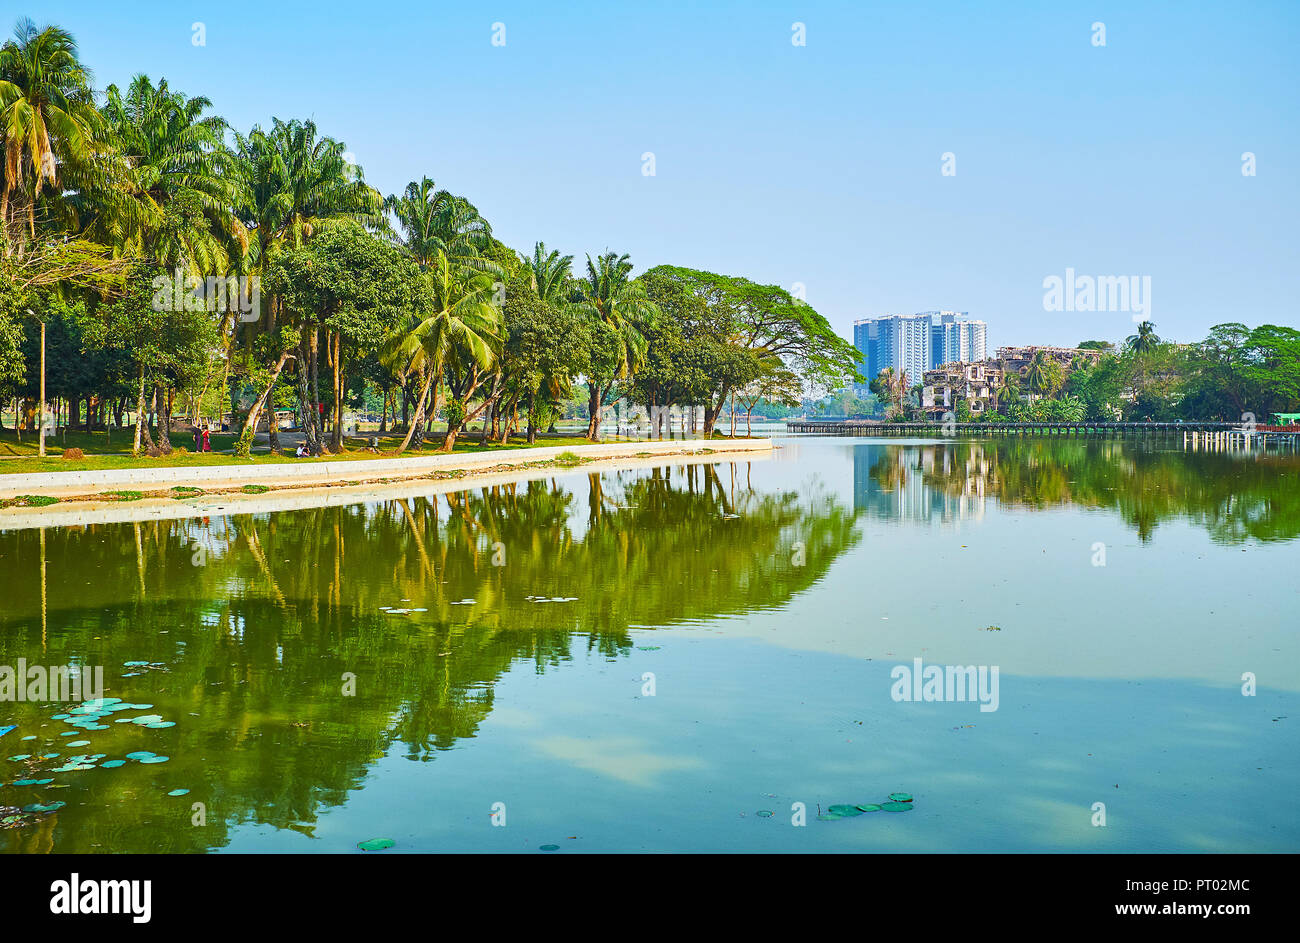 The bridge is nice place to overlook one of the largest city lakes - the Kandawgyi Lake, surrounded by picturesque green park with same name, Bahan to Stock Photo